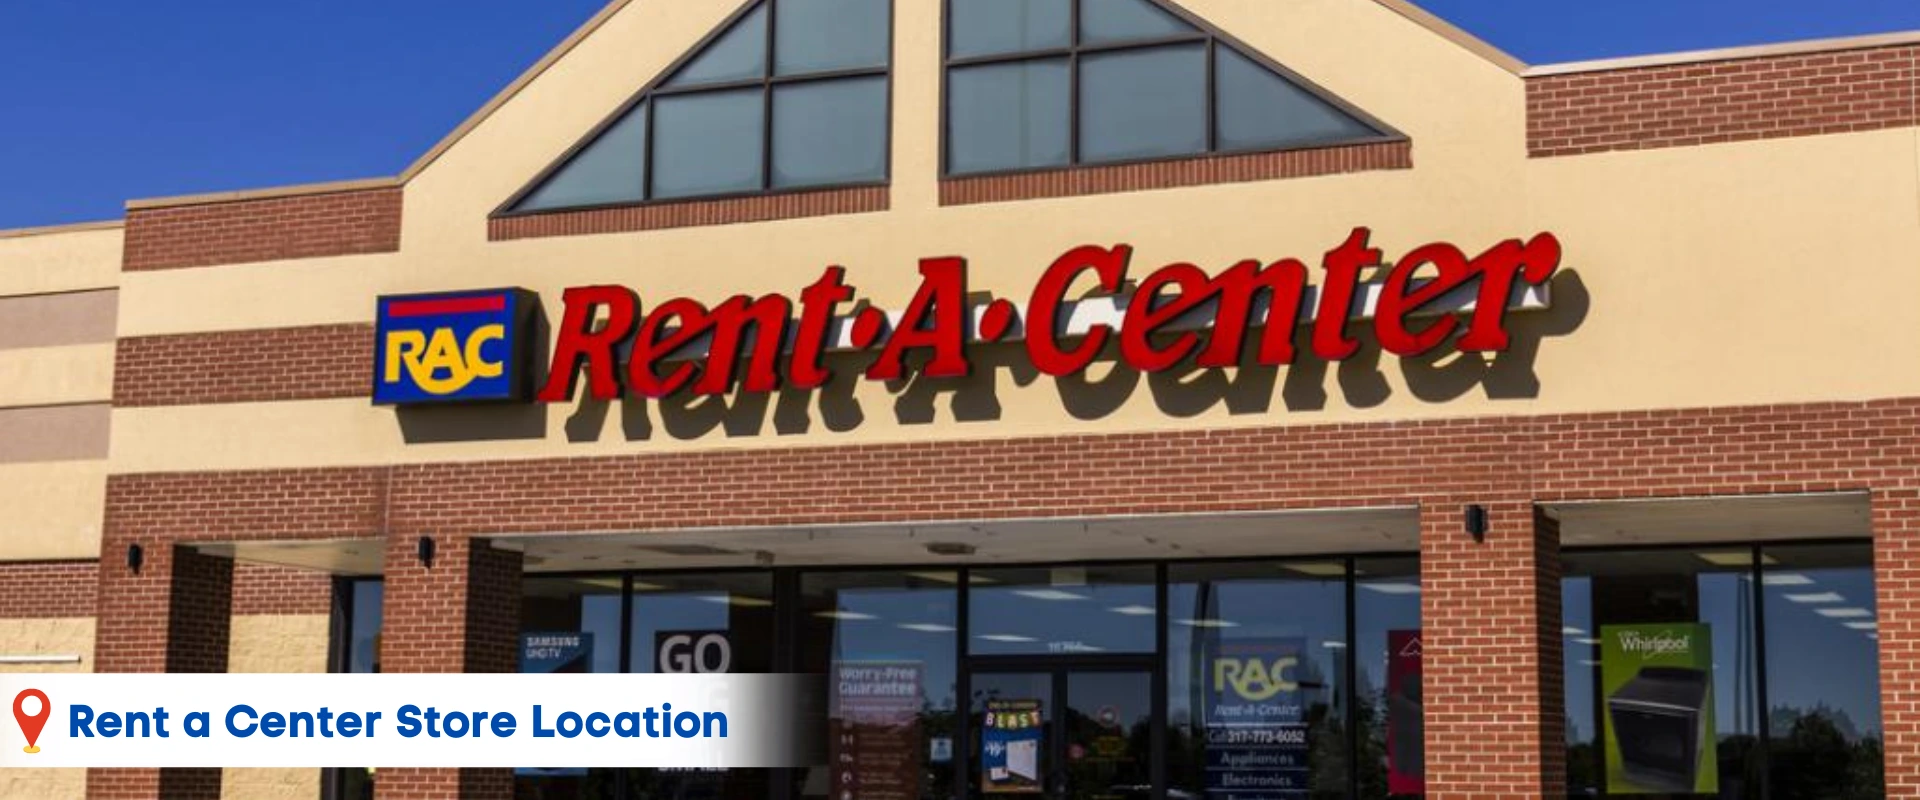 Rent a Center Near Me in Clearfield, PA.